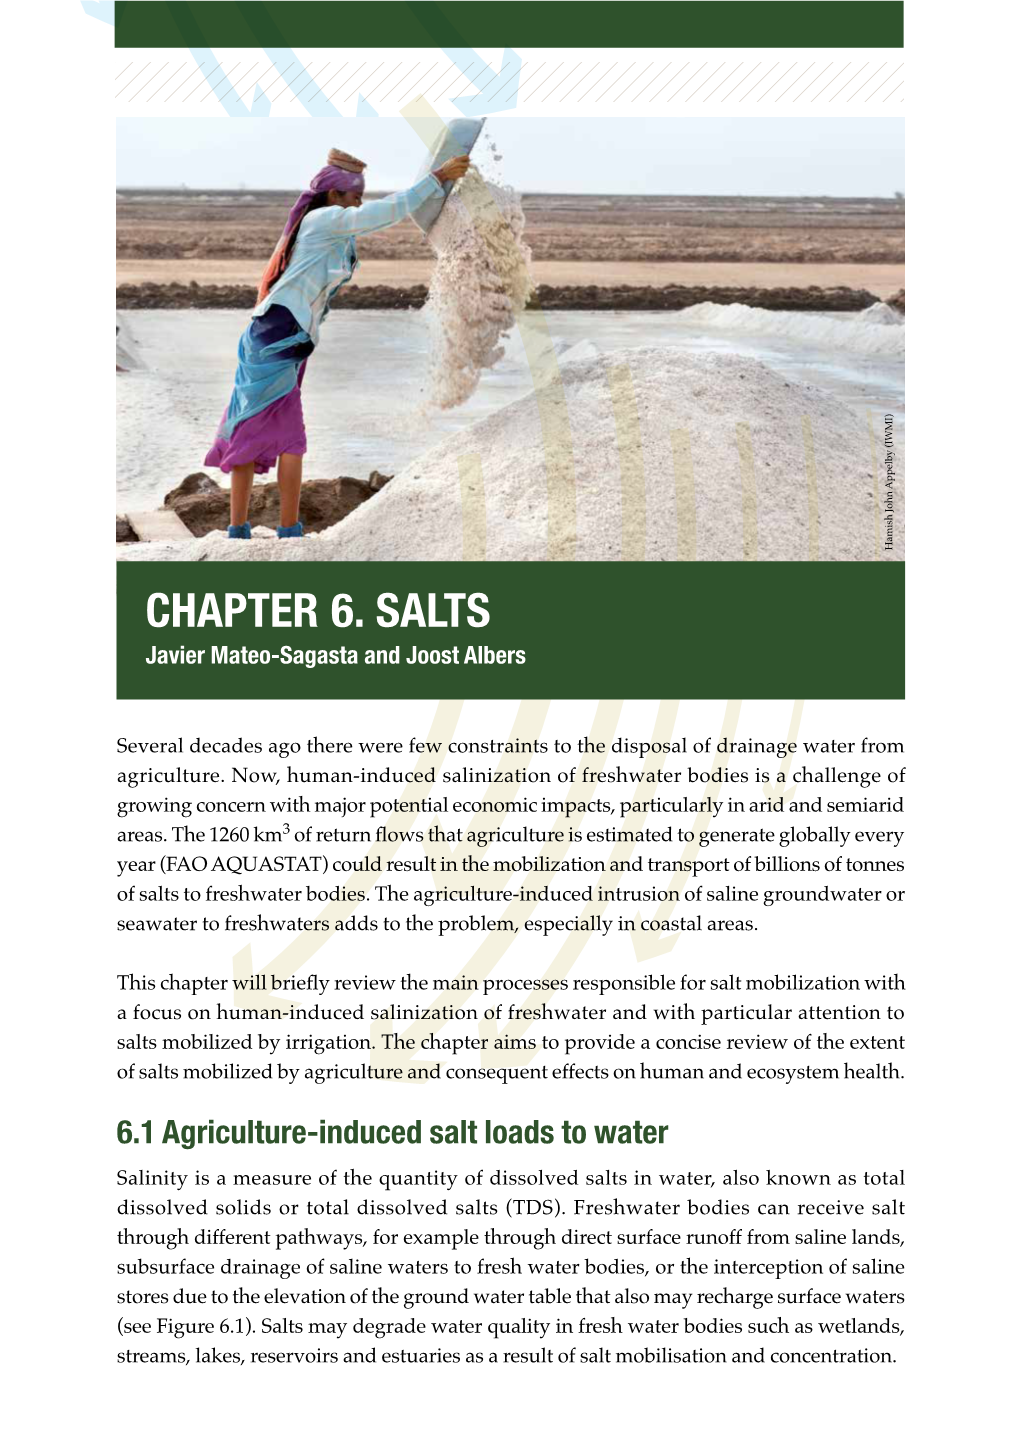 People, More Food, Worse Water? - a Global Review of Water Pollution from Agriculture 95